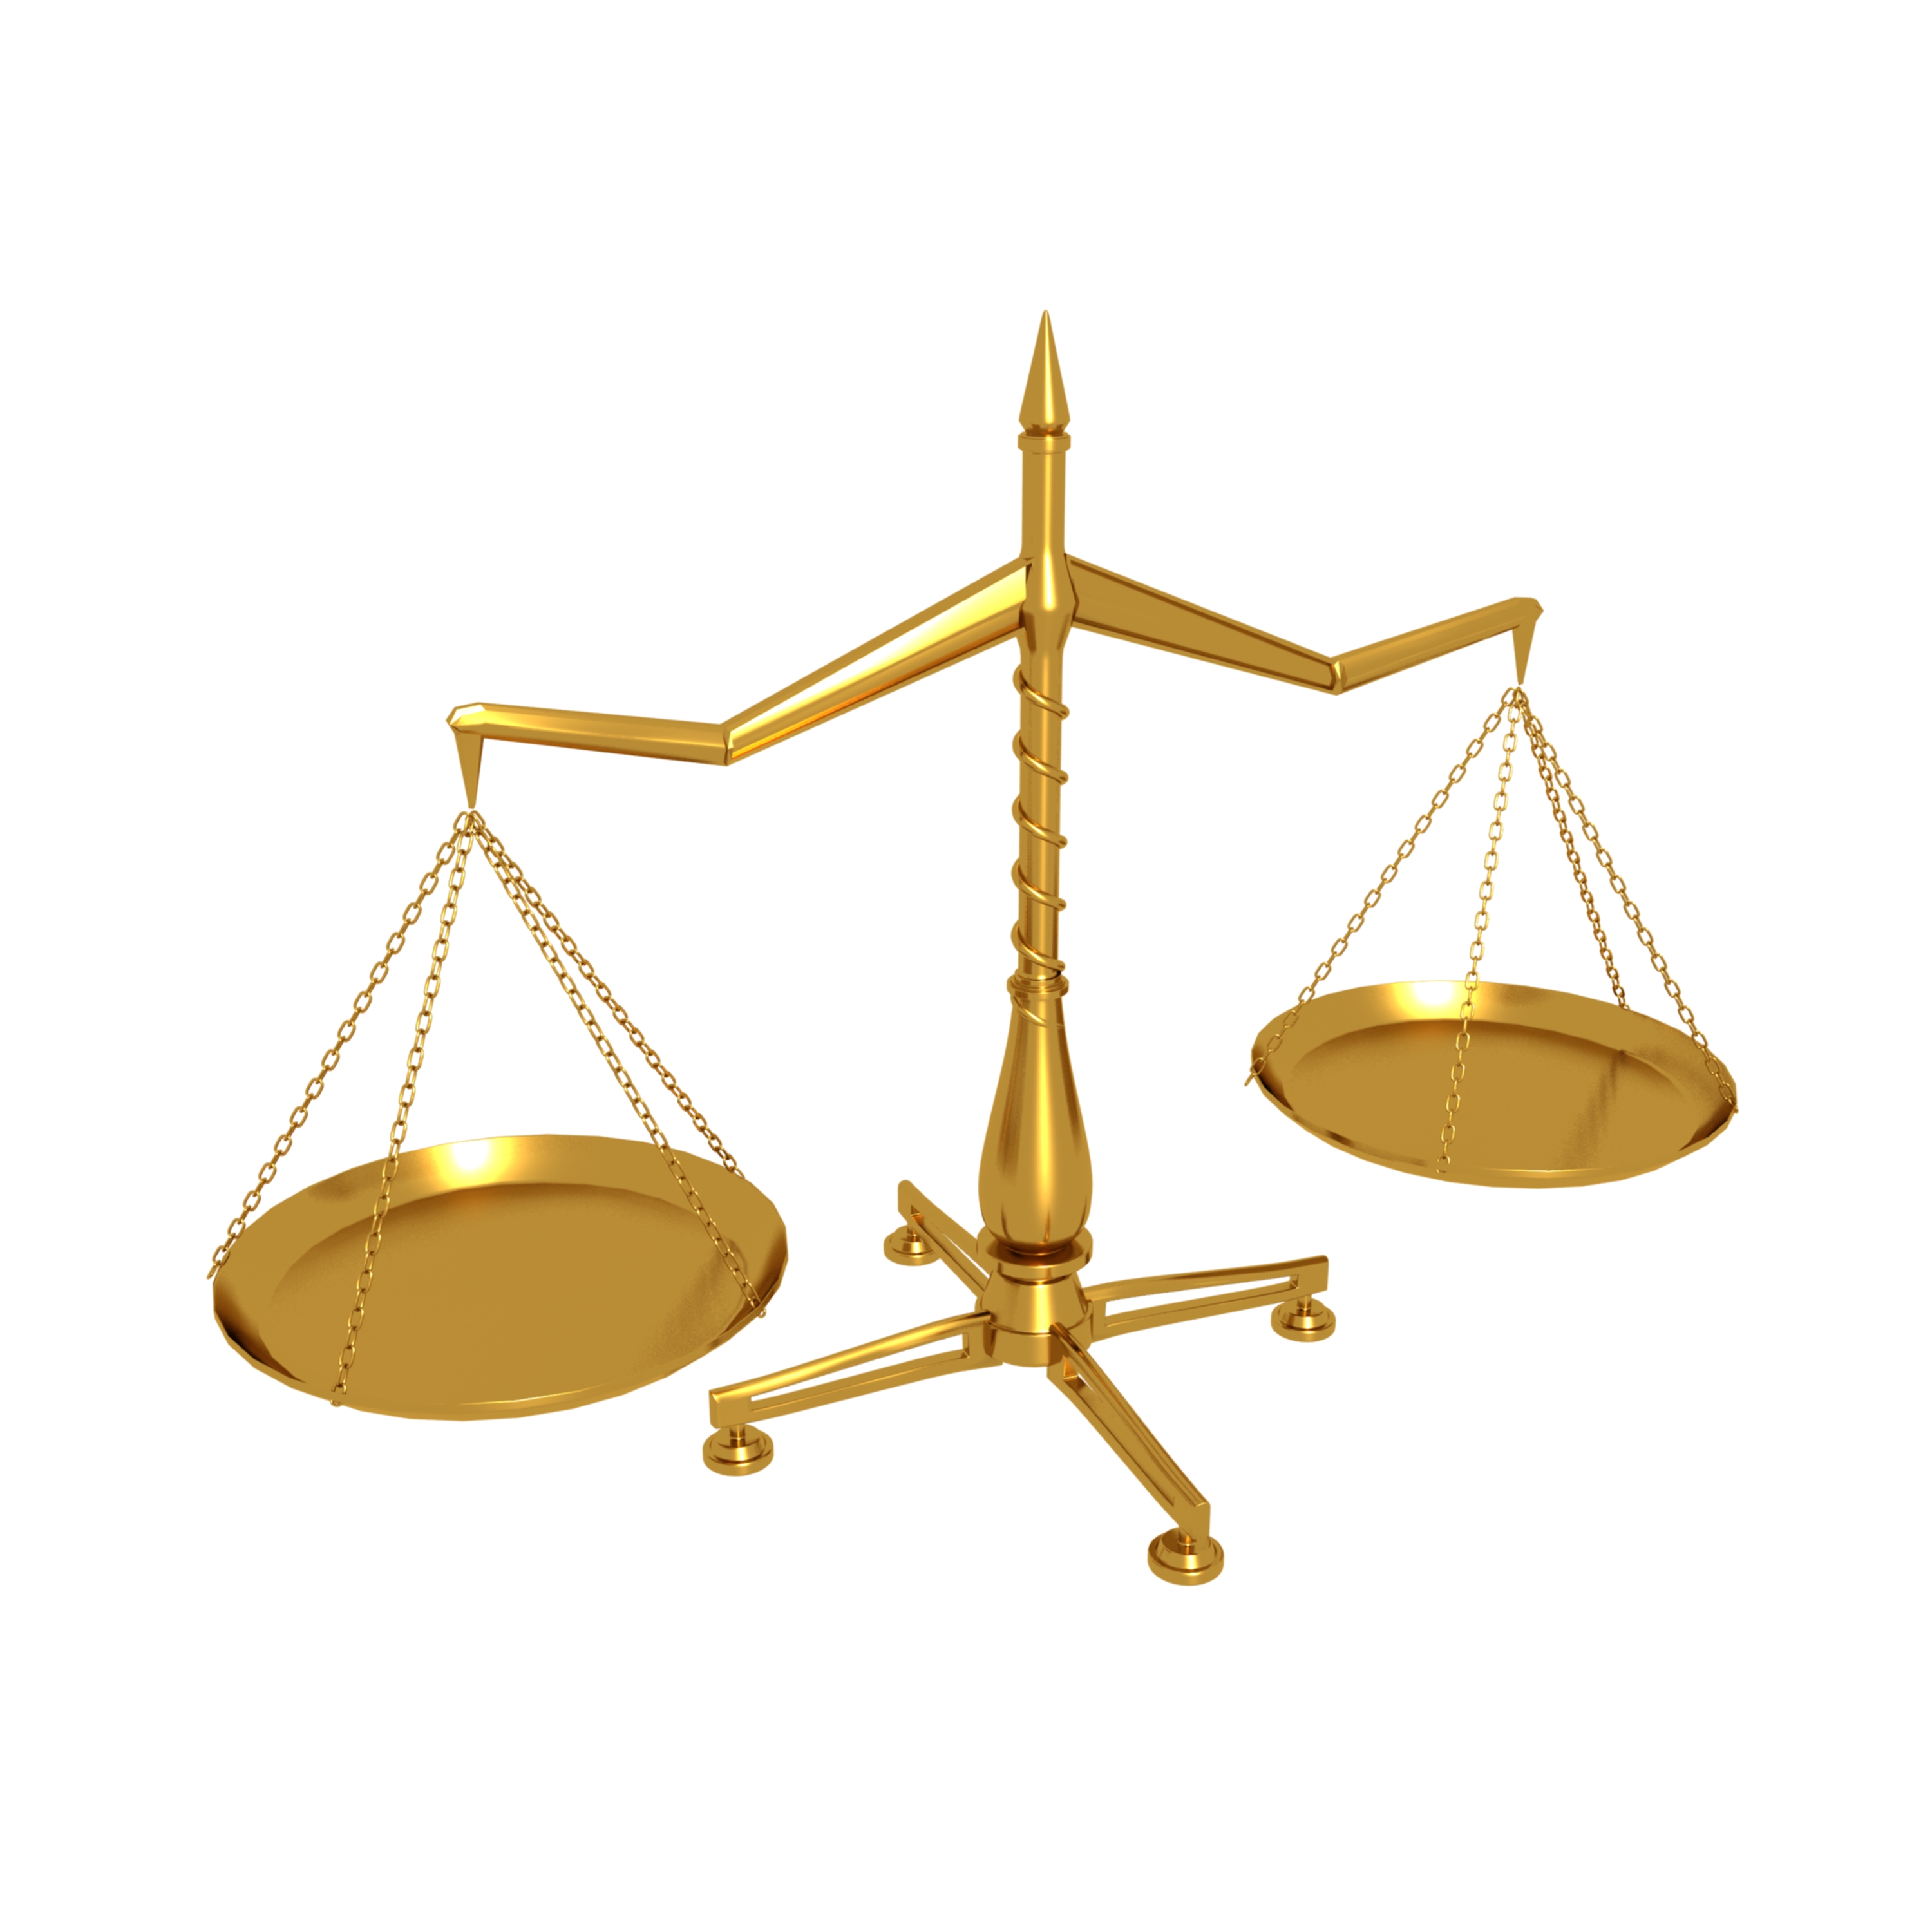 Balance Scale Picture   Clipart Best